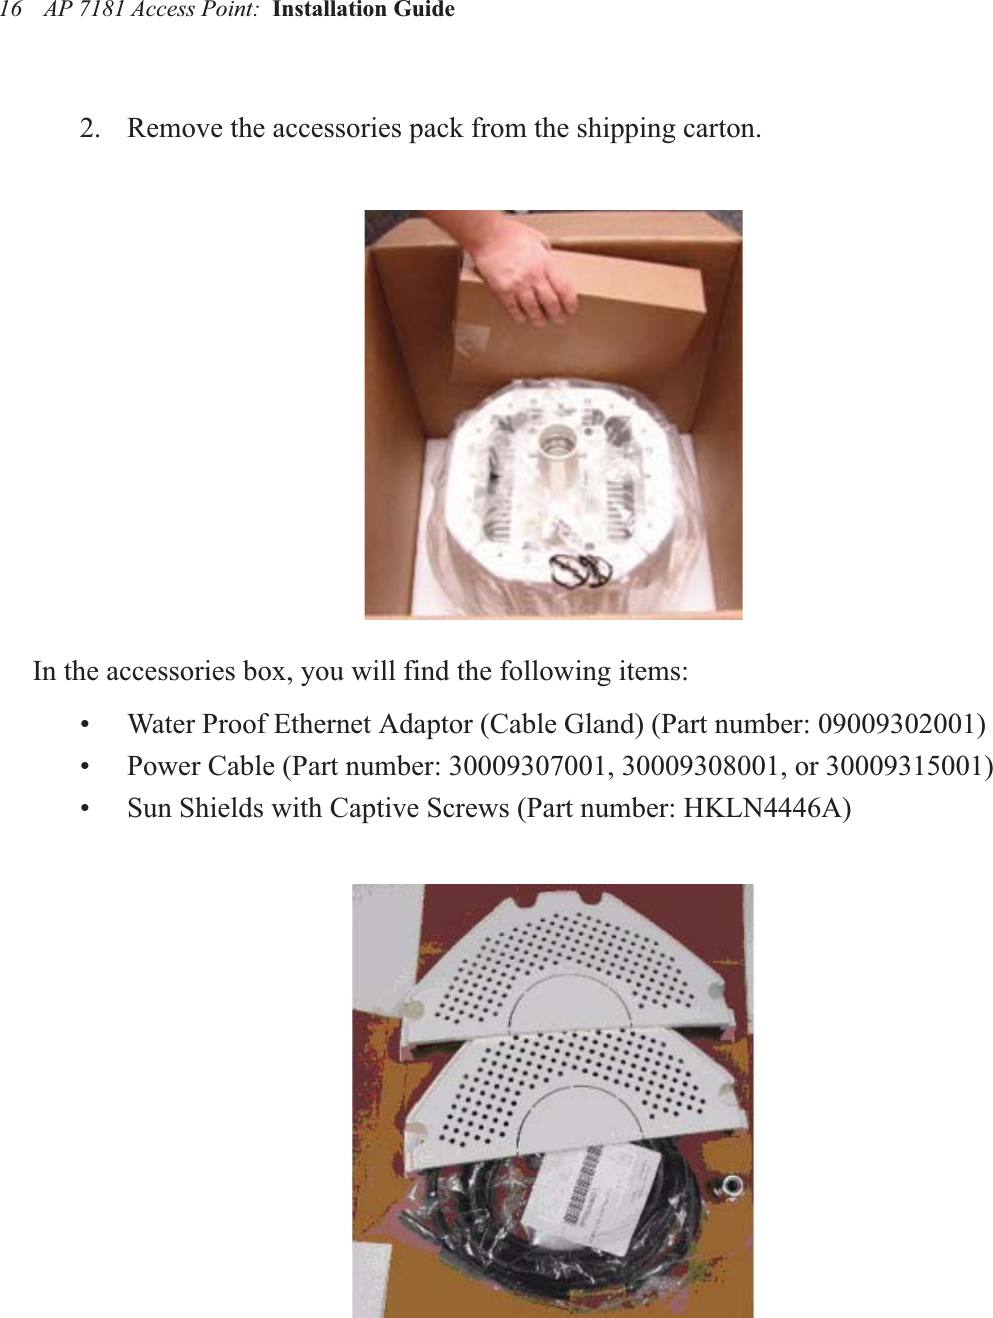 AP 7181 Access Point:  Installation Guide 162. Remove the accessories pack from the shipping carton.In the accessories box, you will find the following items:• Water Proof Ethernet Adaptor (Cable Gland) (Part number: 09009302001)• Power Cable (Part number: 30009307001, 30009308001, or 30009315001)• Sun Shields with Captive Screws (Part number: HKLN4446A)